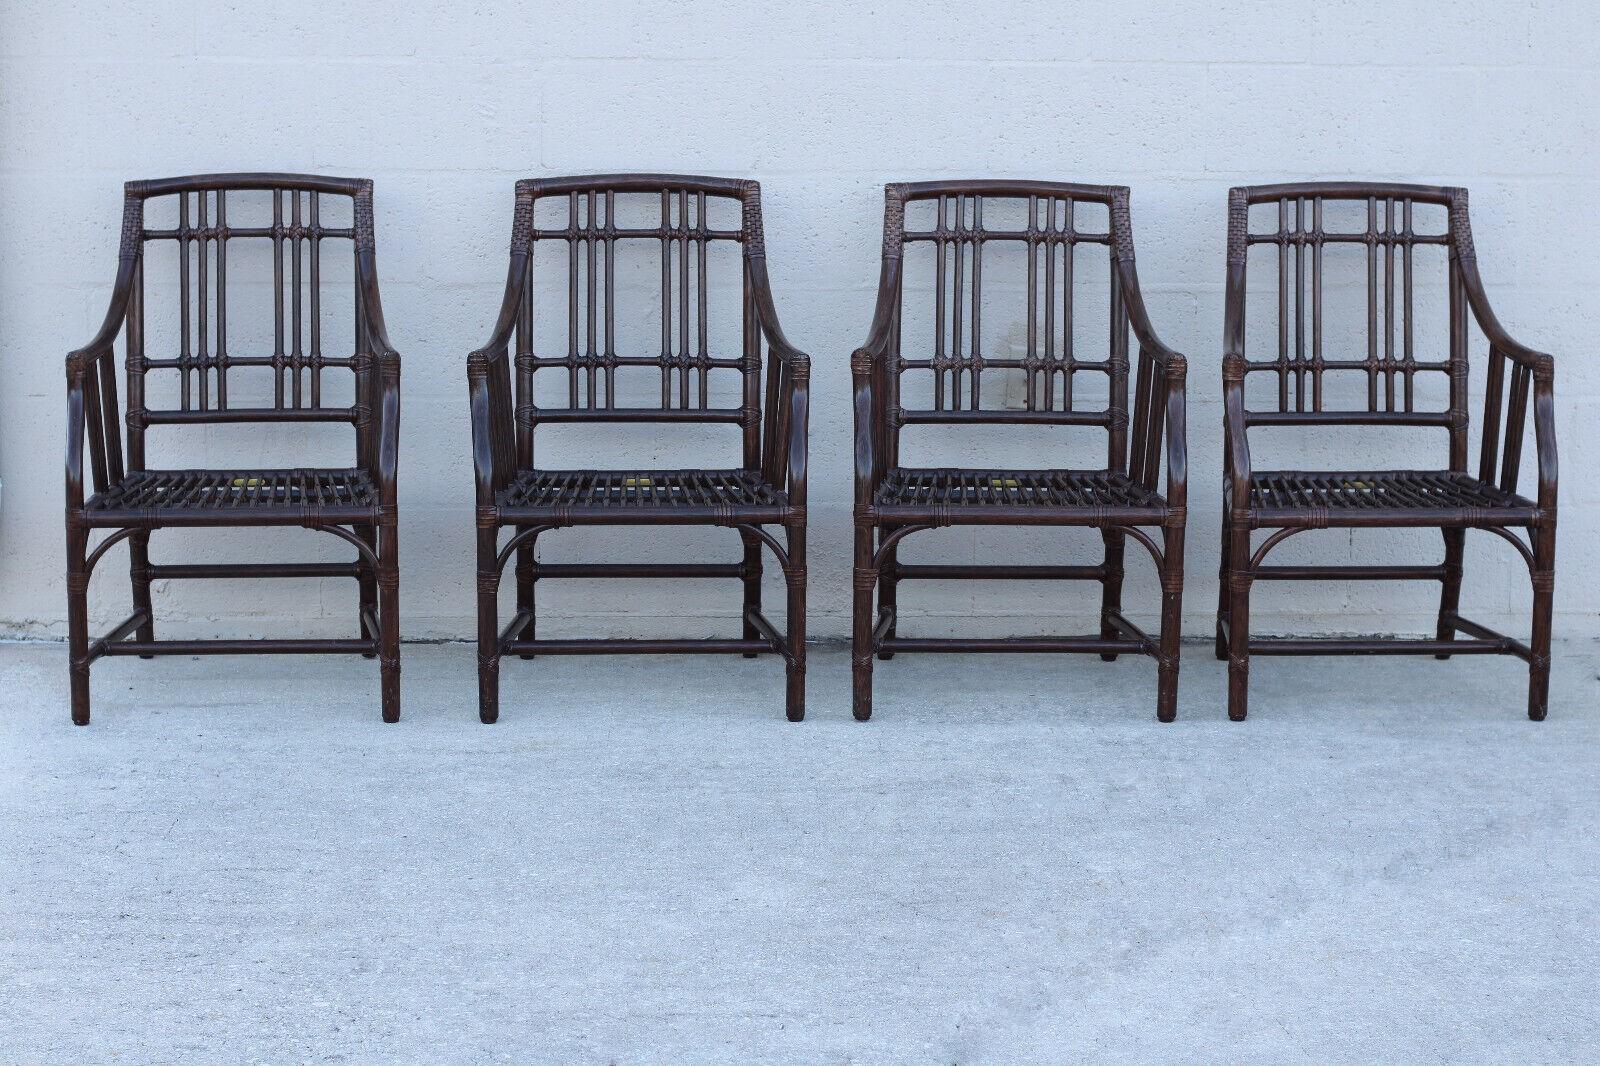 Elinor McGuire Balboa Rattan Arm Chairs or Dining Chairs, a Set of 4 1